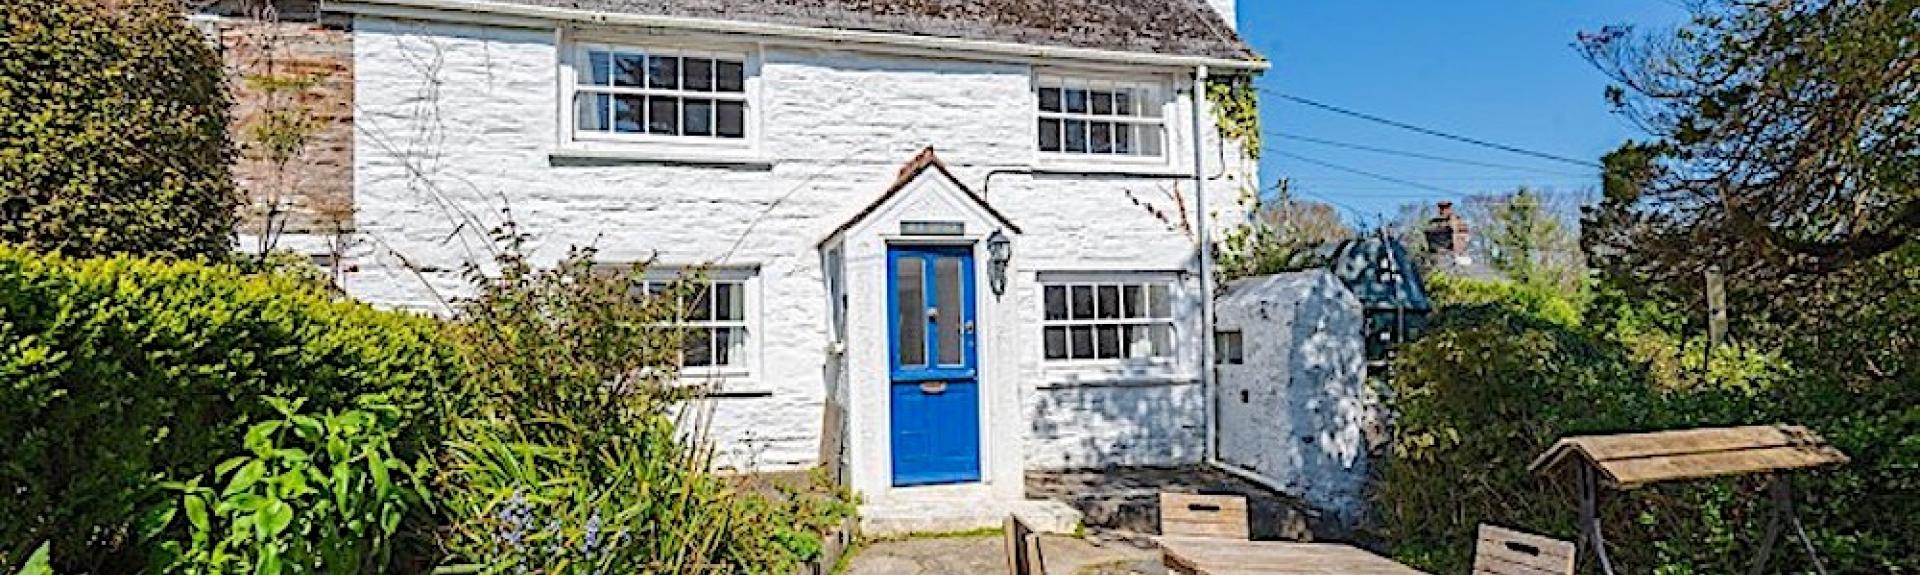 A stone-built Feock holiday cottage overlooks a flagstone patio with outdoor tables and chairs